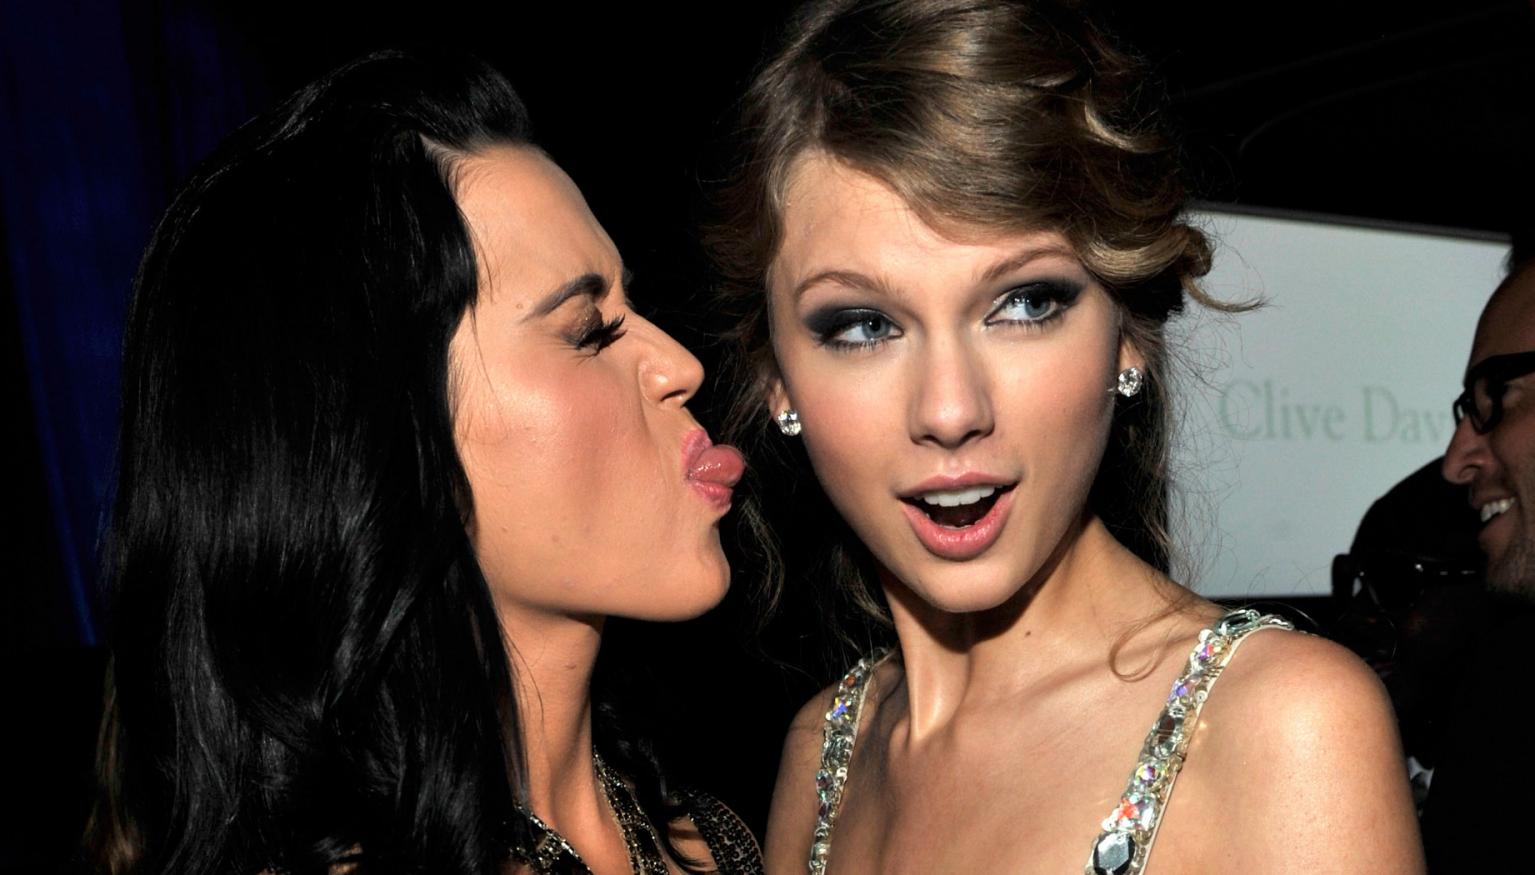 Katy Perry jumps in the ring with Taylor Swift and Nicki Minaj on